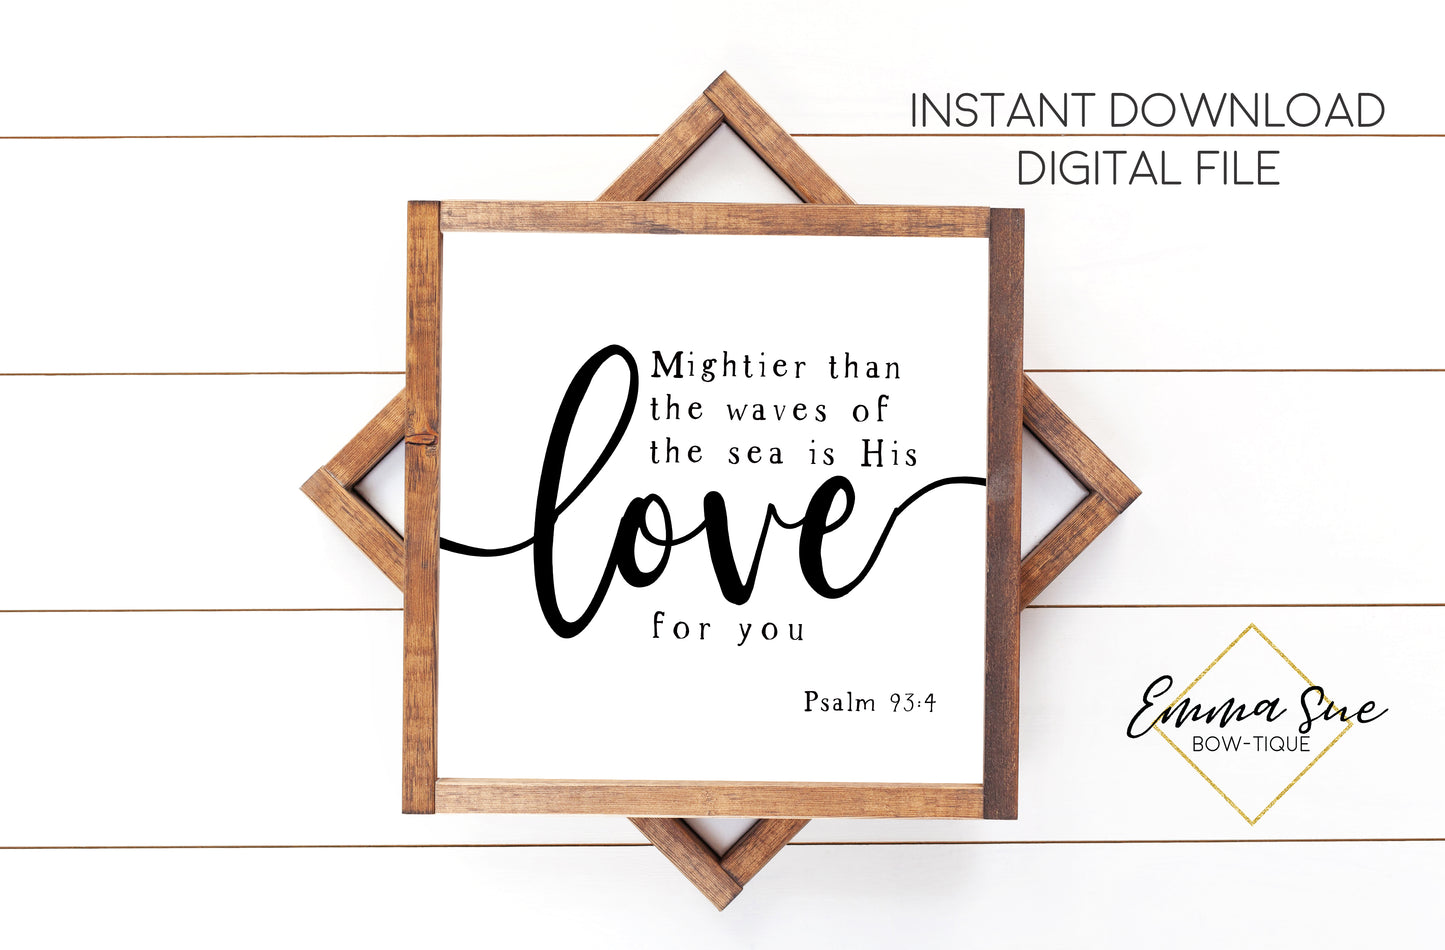 Mightier than the waves of the sea is His Love for you - Psalm 93:4 -  Christian Farmhouse Printable Art Sign Digital File